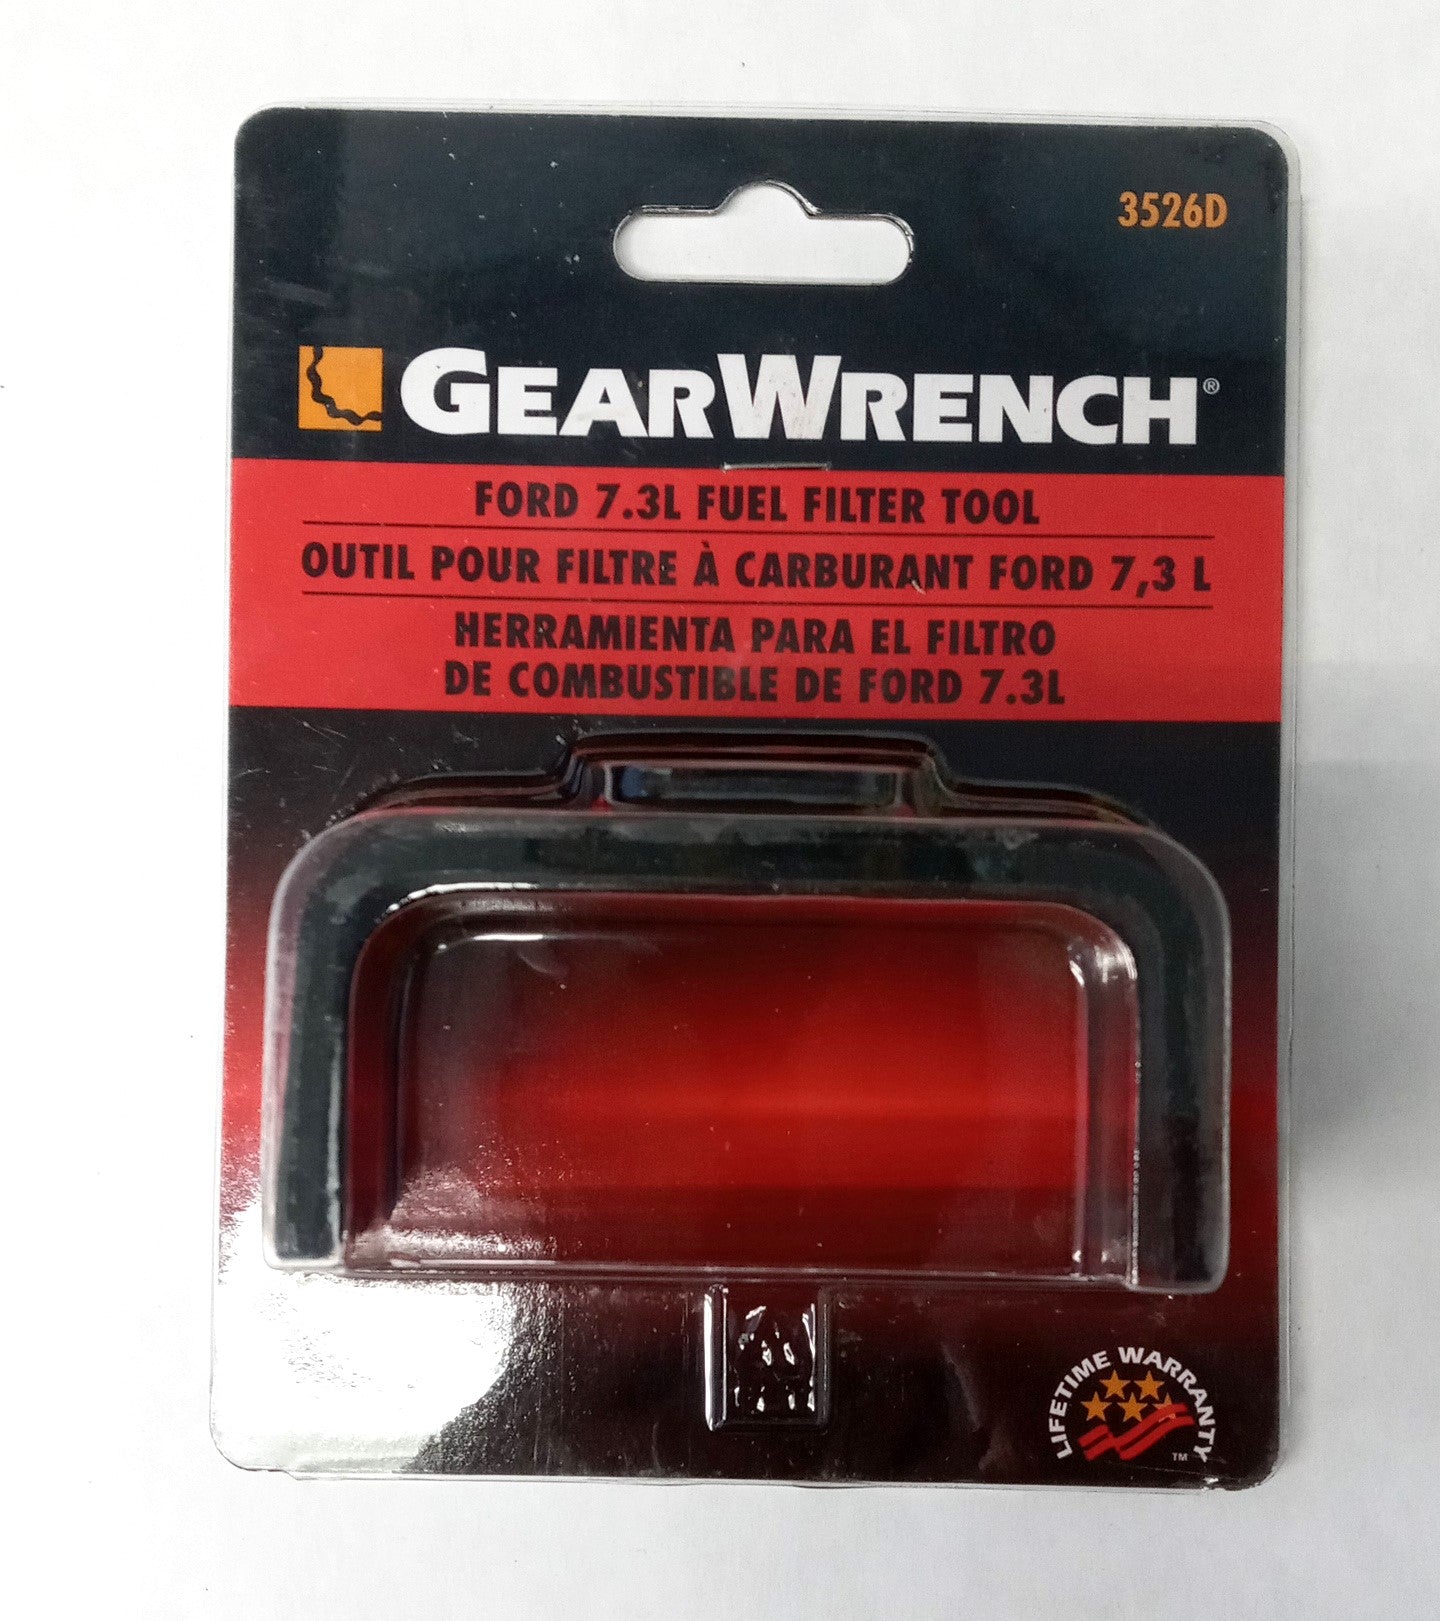 GearWrench 3526D Ford 7.3L Fuel Filter Tool